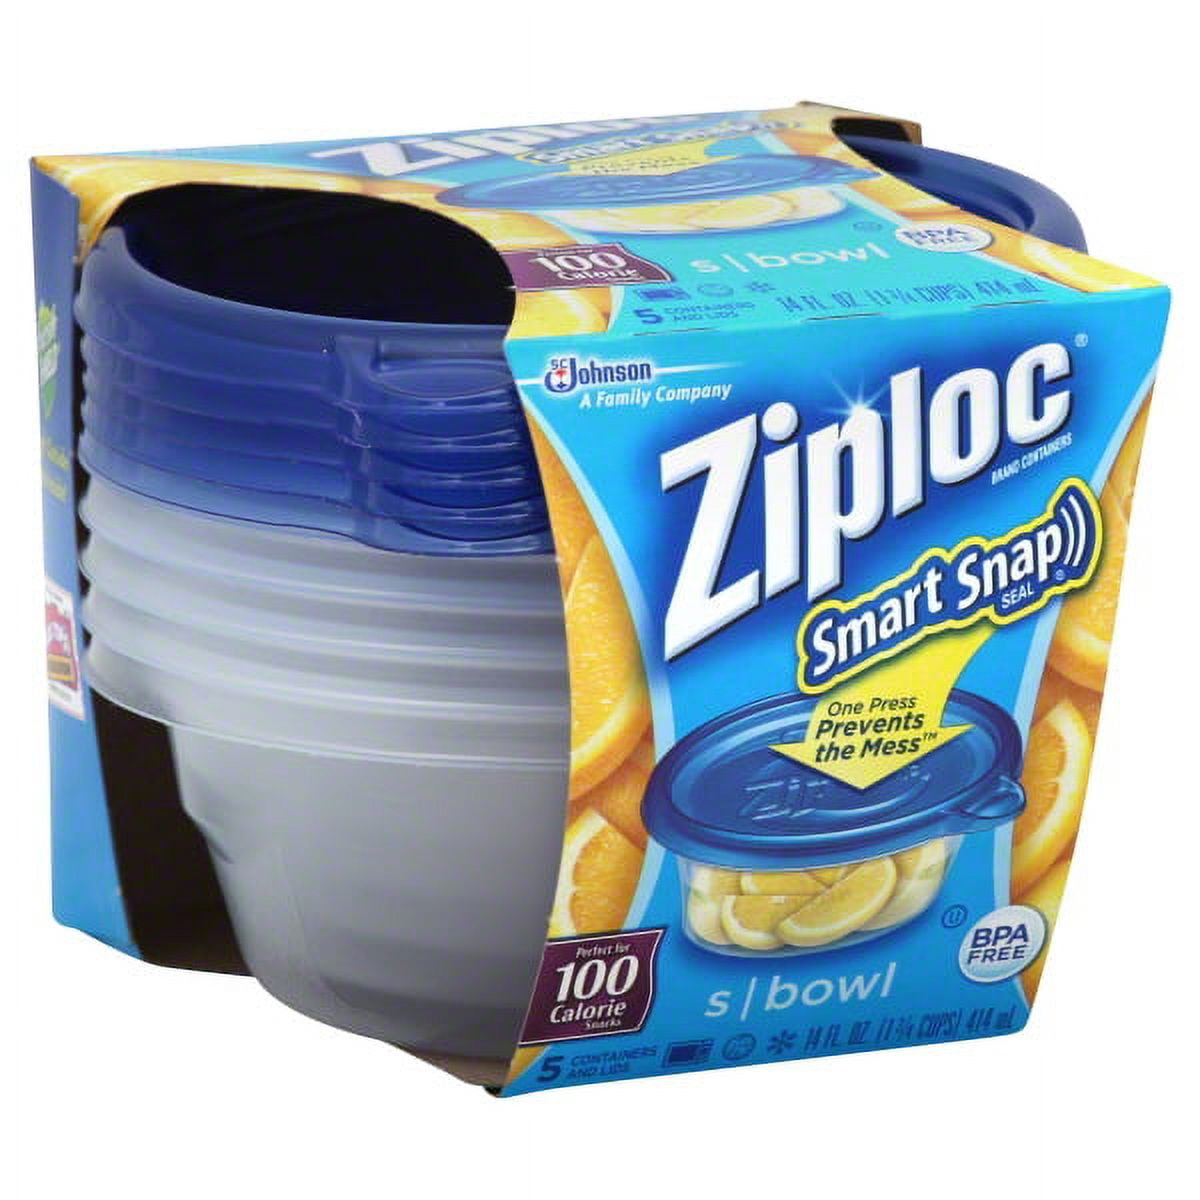 Ziploc M Bowls with Smart Snap Seal - 4 CT